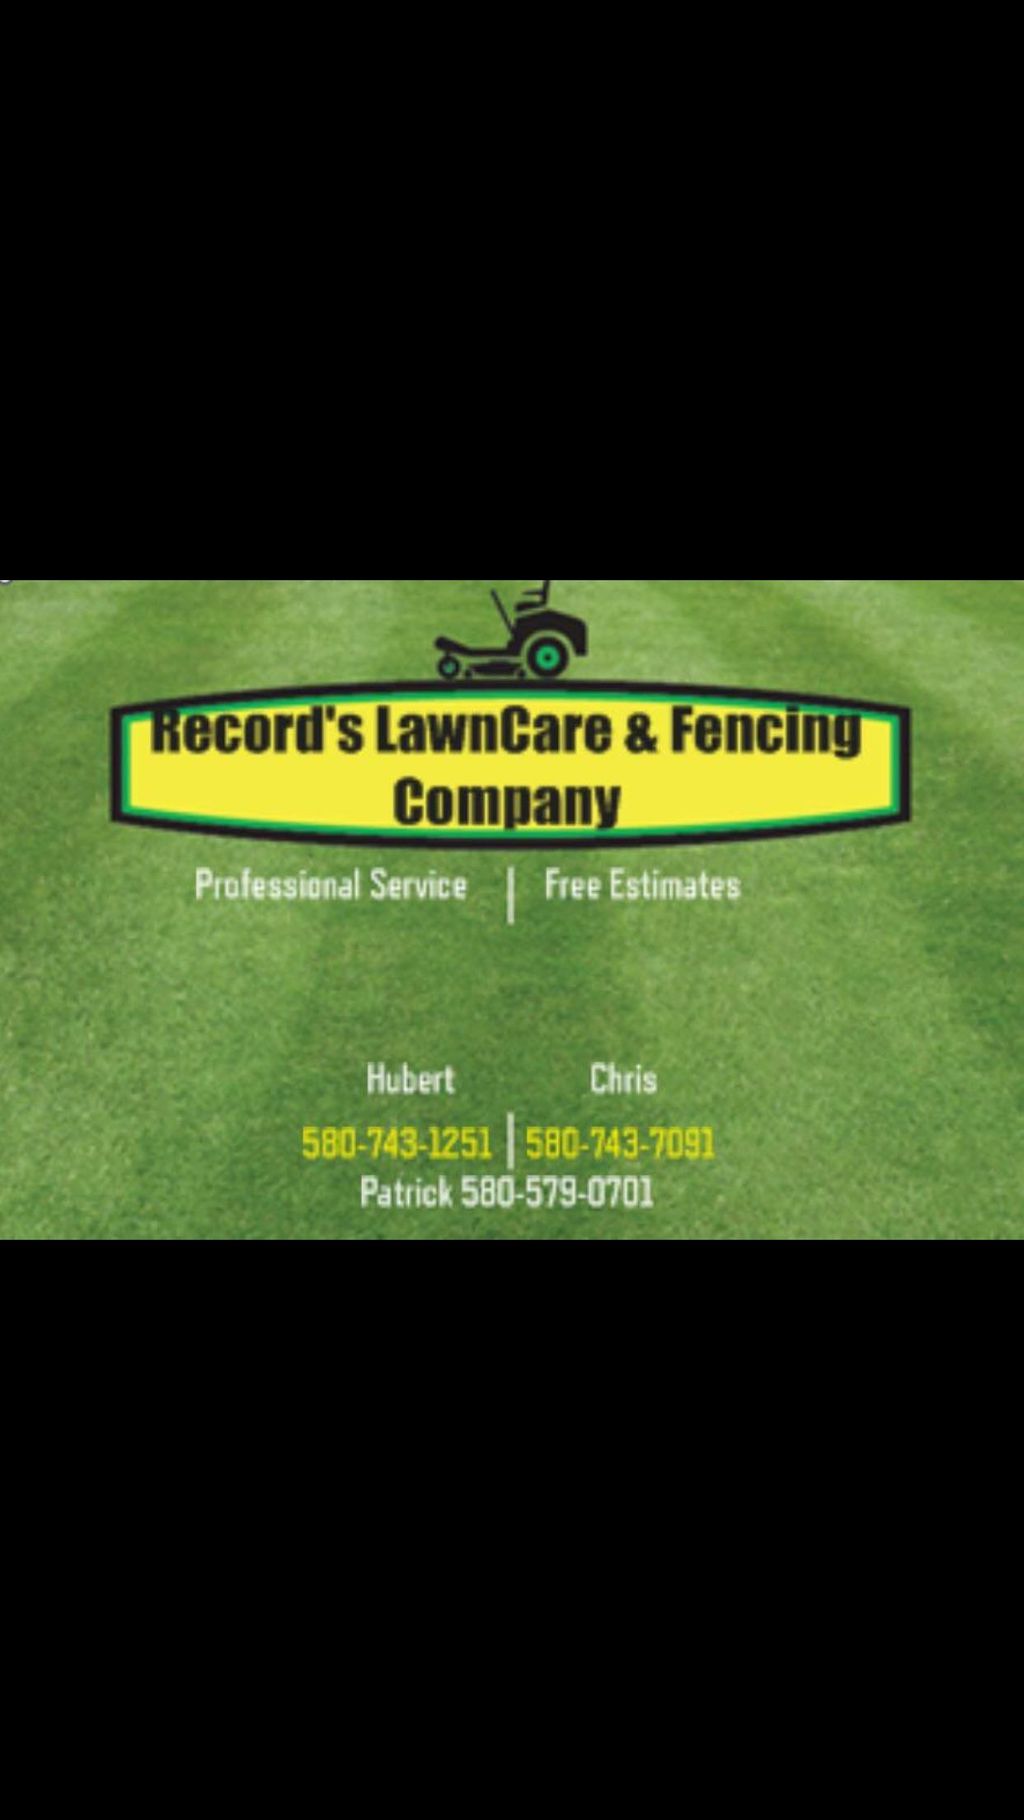 Record's Lawn Care & Fencing Co.